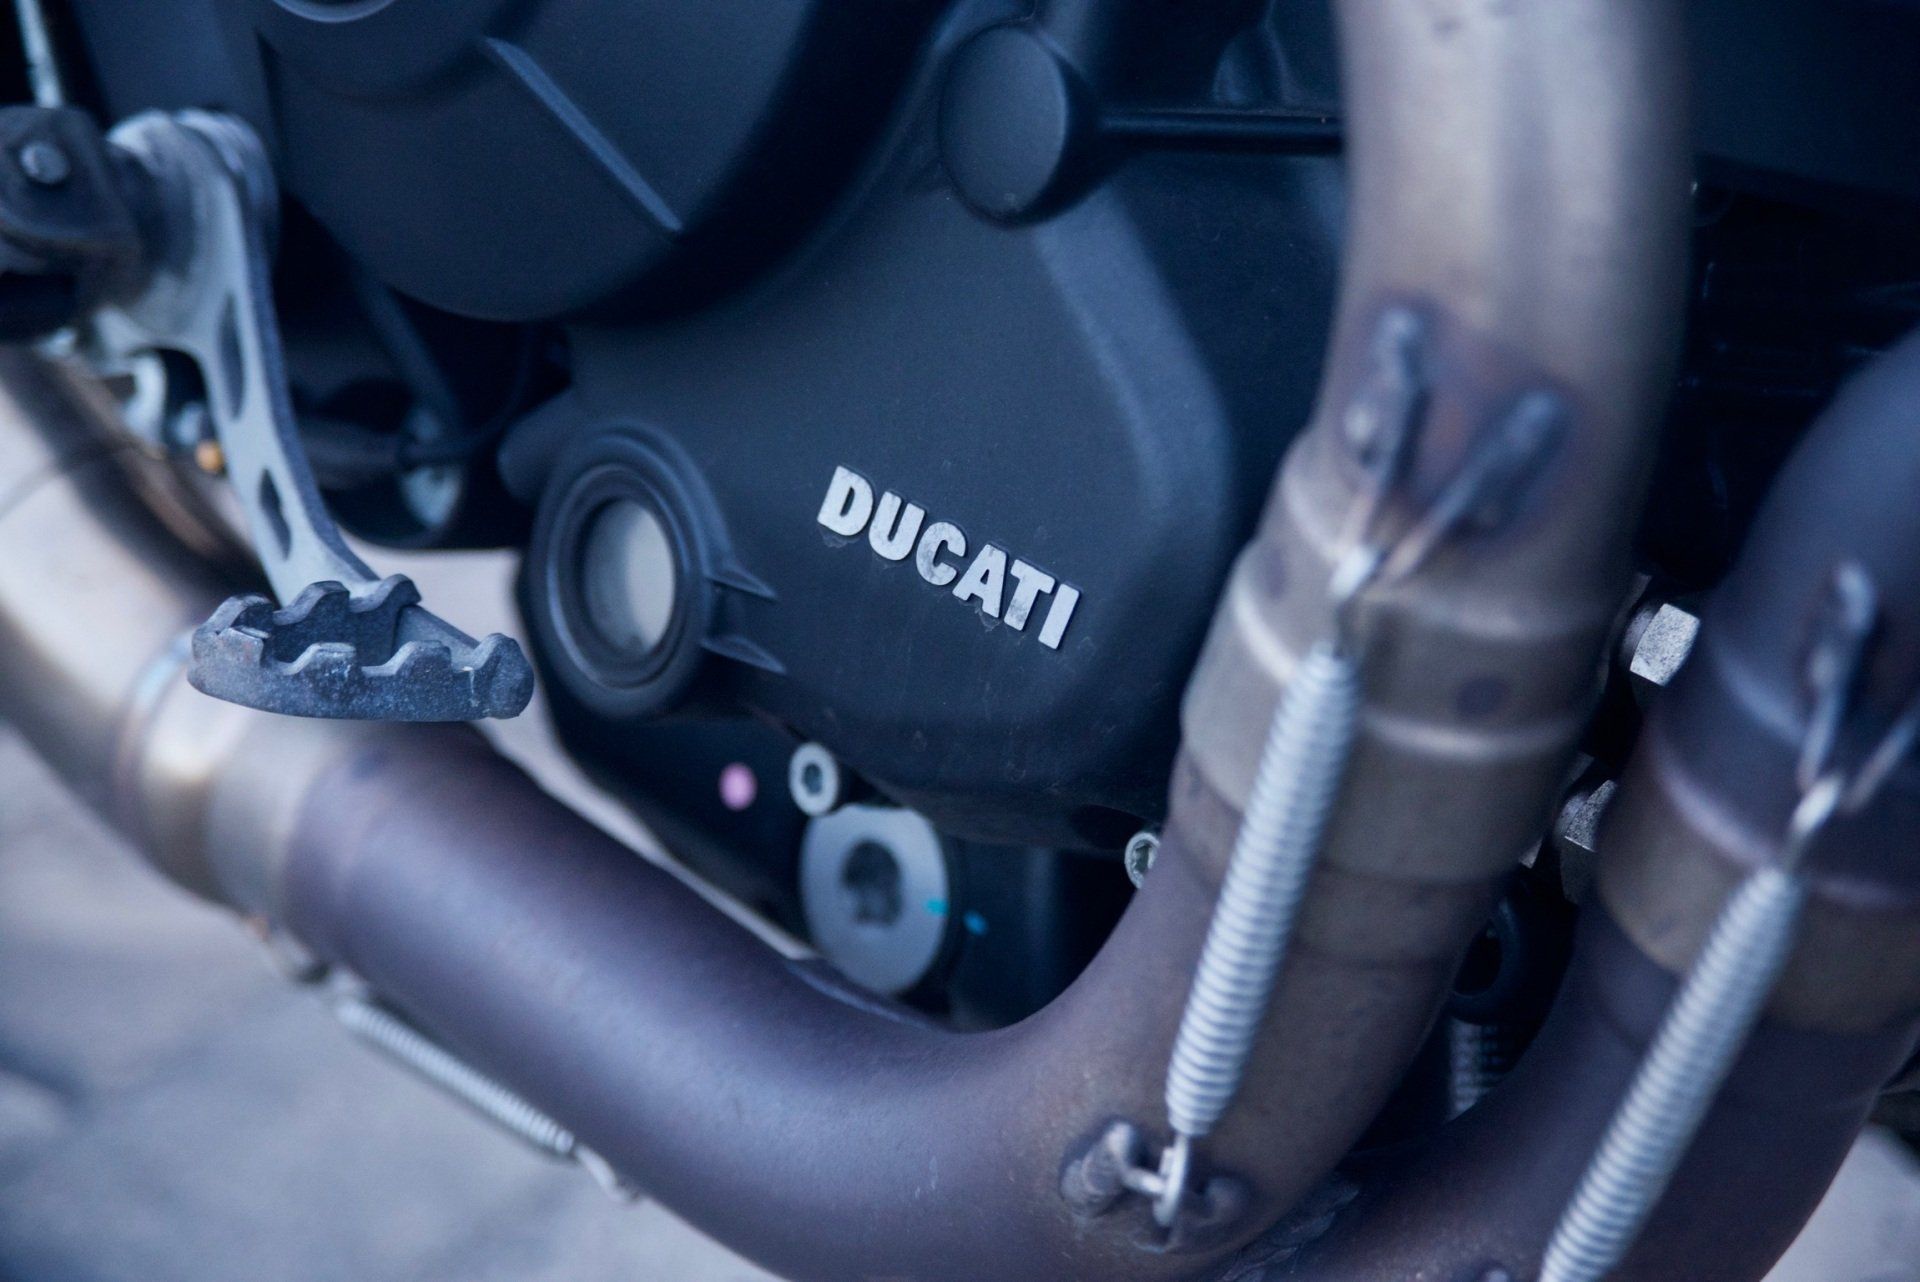 A close up of the engine of a ducati motorcycle.